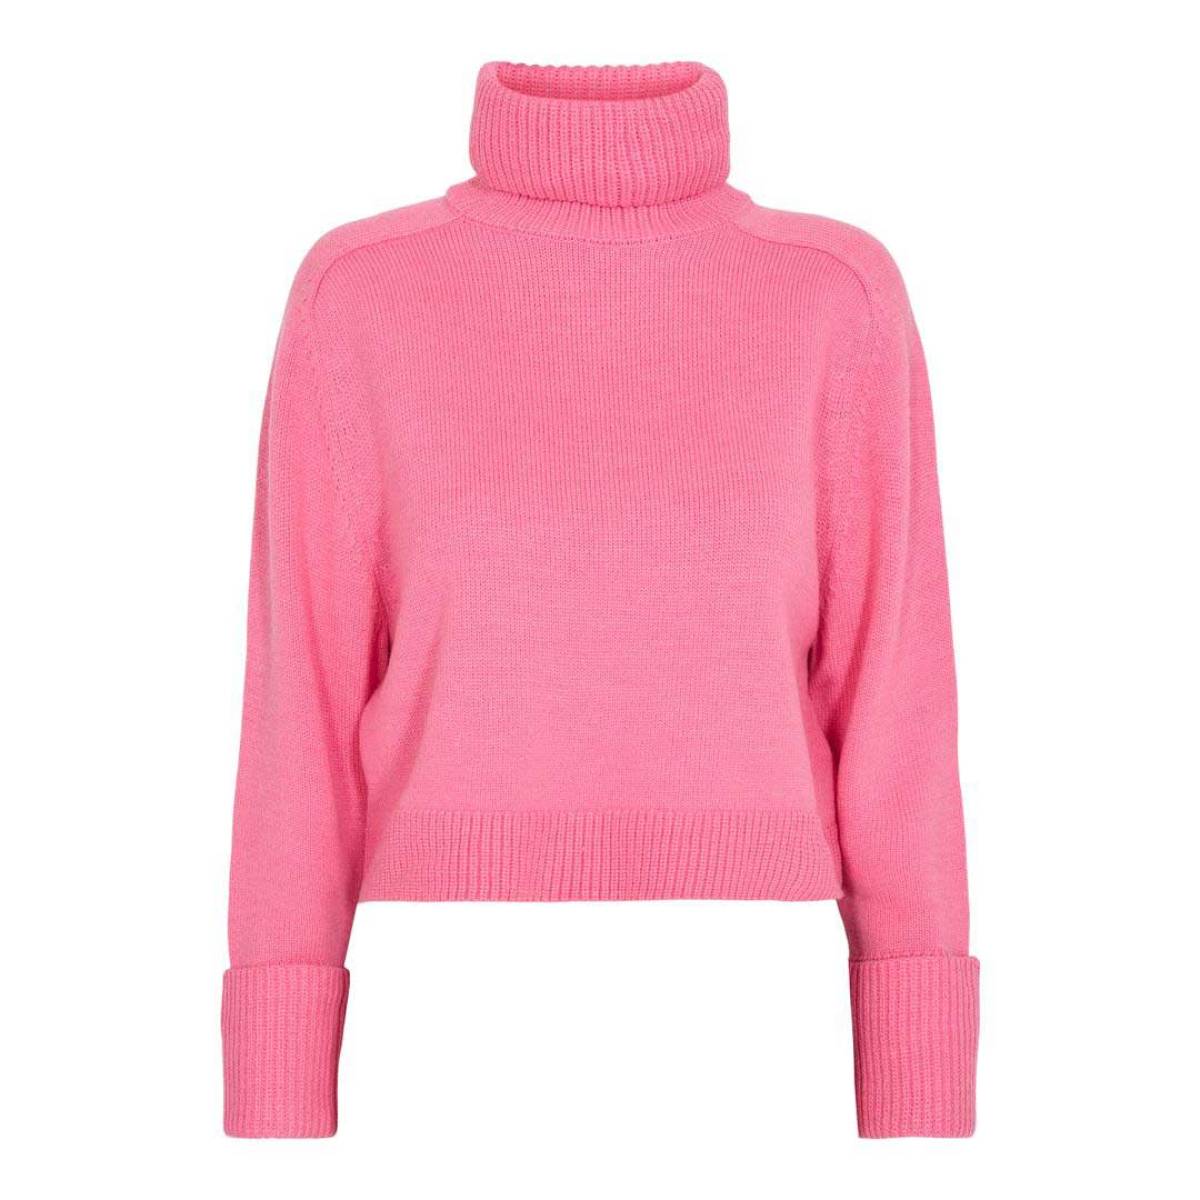 Mero crop knit pink Co’Couture